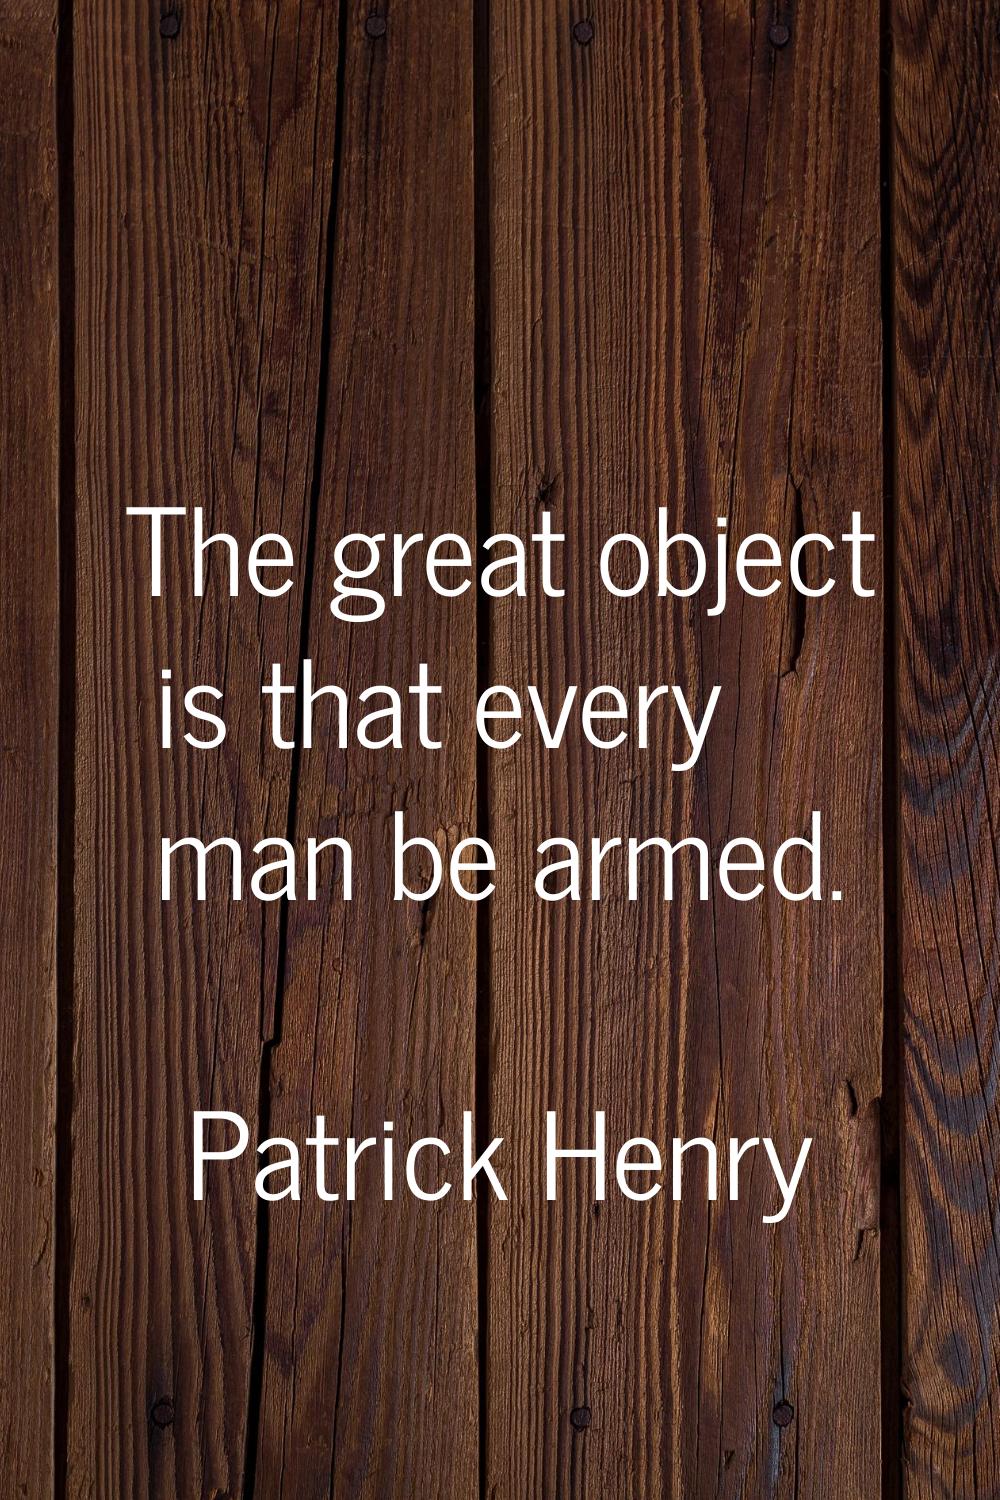 The great object is that every man be armed.